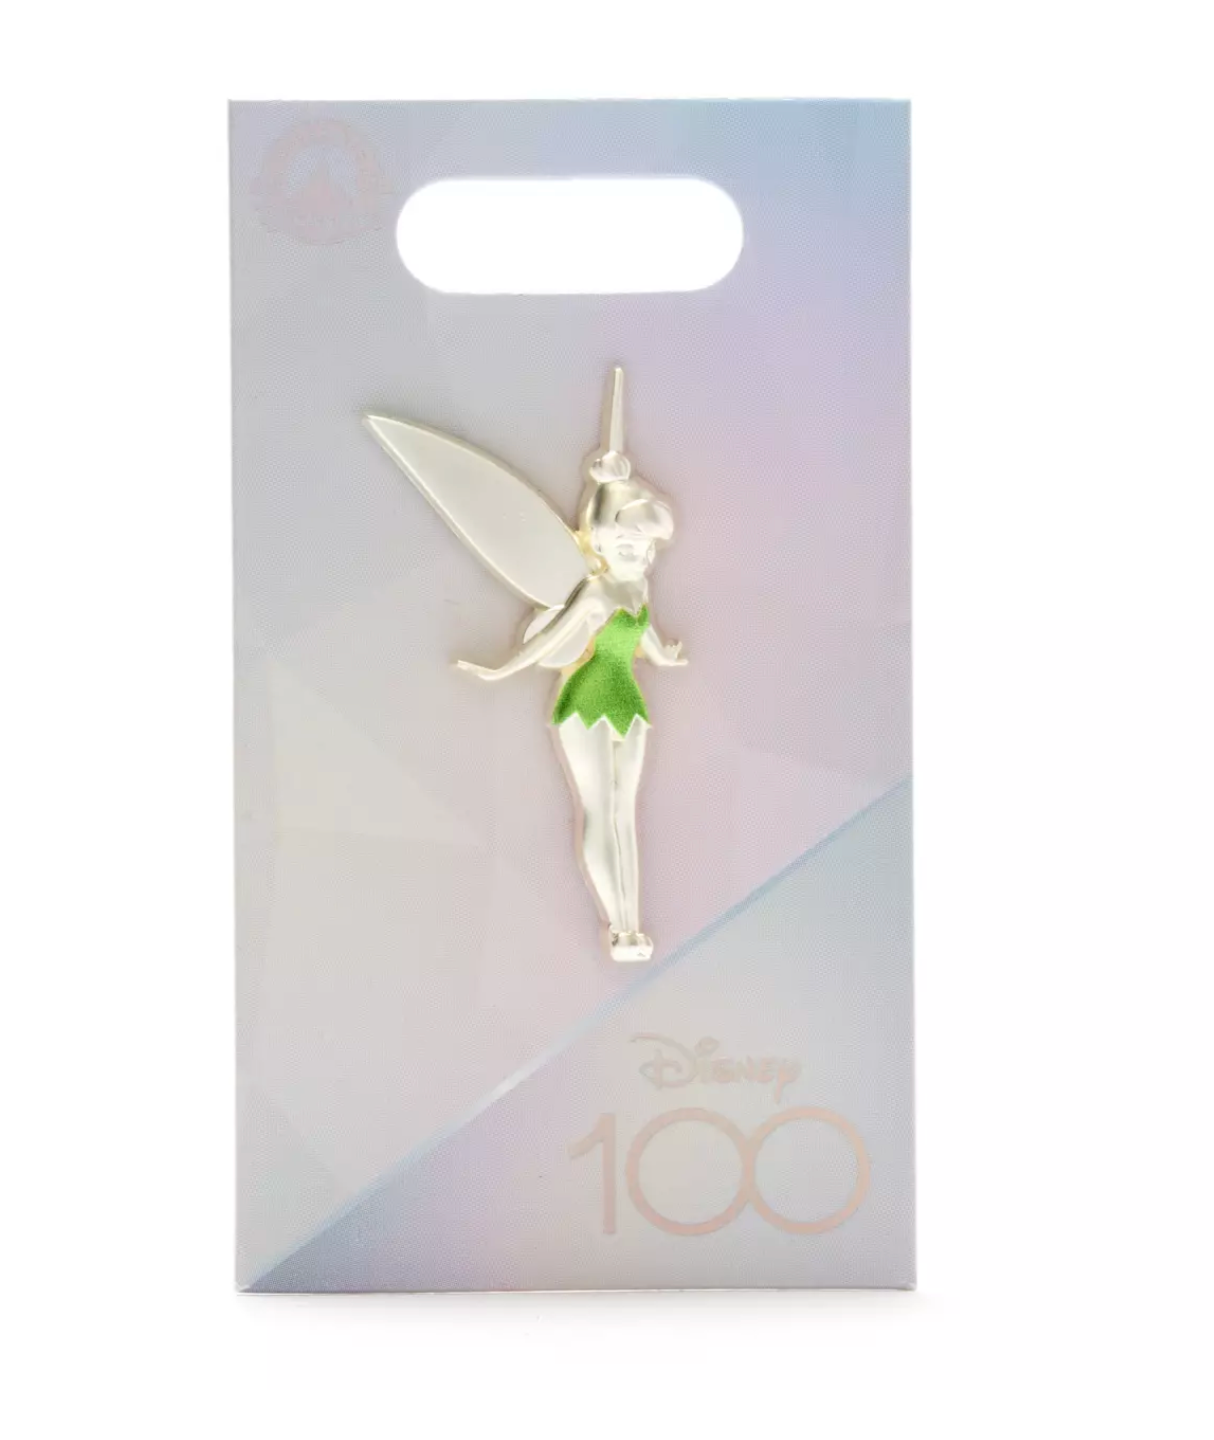 Disney 100 Years of Wonder Celebration Tinker Bell 3D Pin New with Card